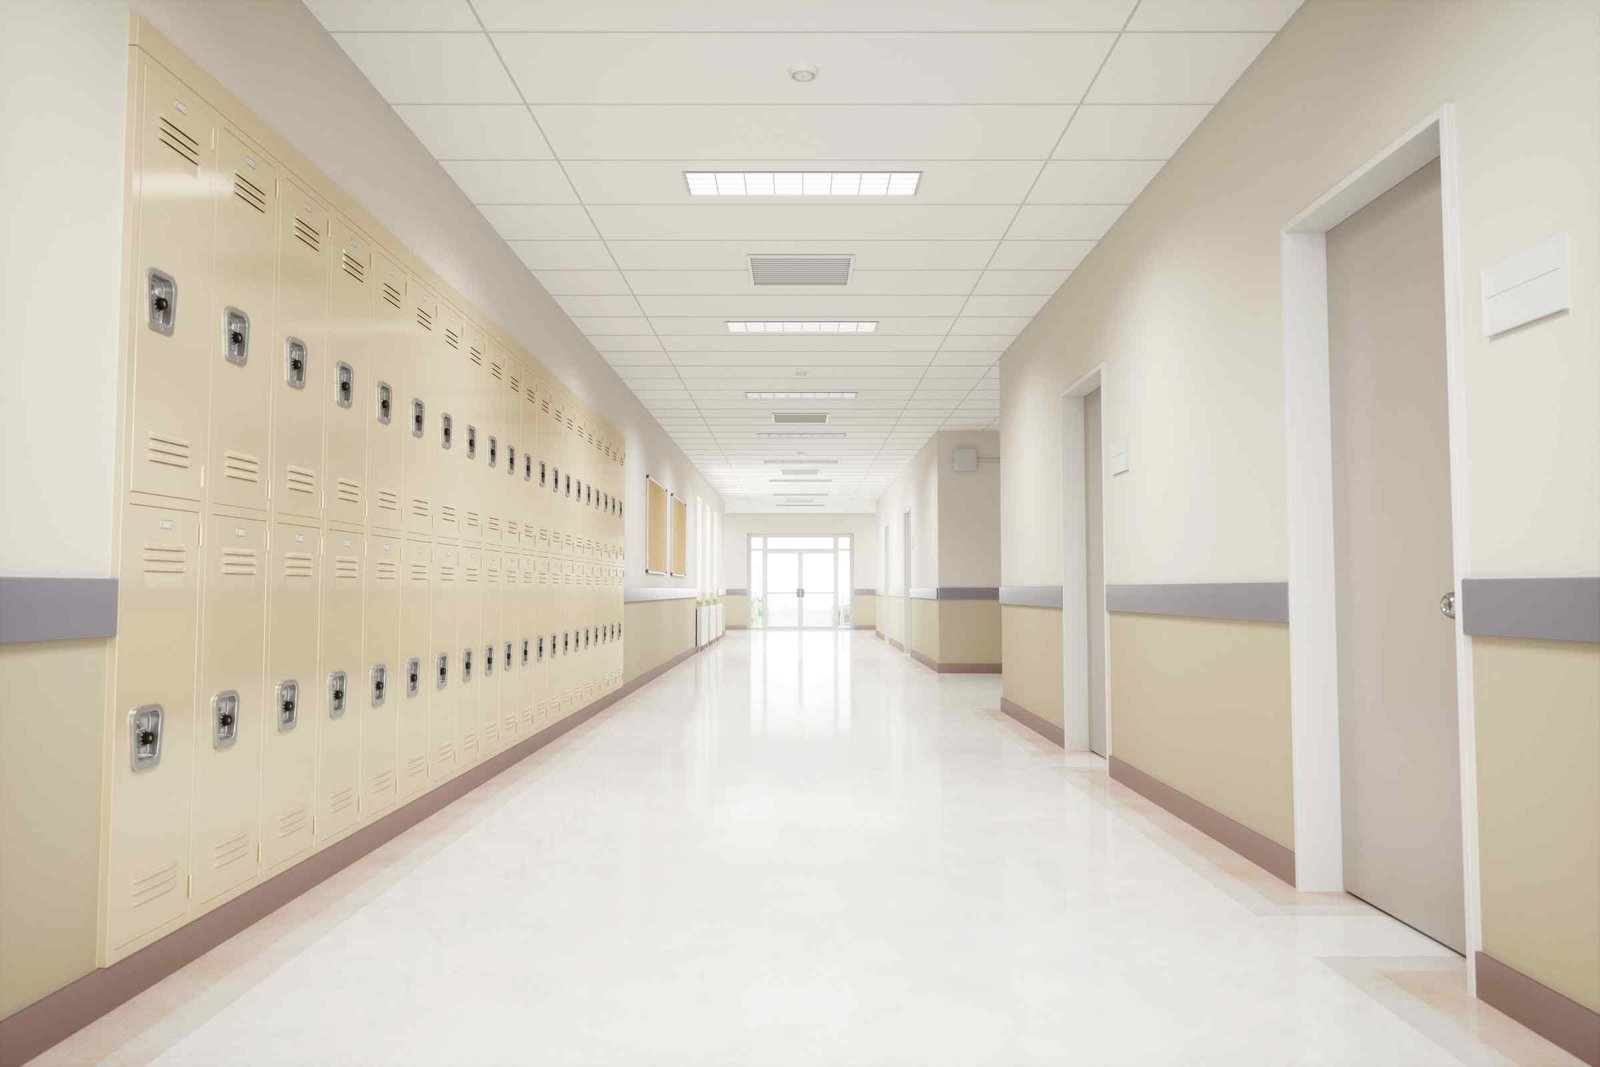 Top-Rated Institution Cleaning When running an institution, it is crucial to focus on key priorities to ensure it runs smoothly, safely, and efficiently. One critical priority you should always pay attention to is cleaning your space.